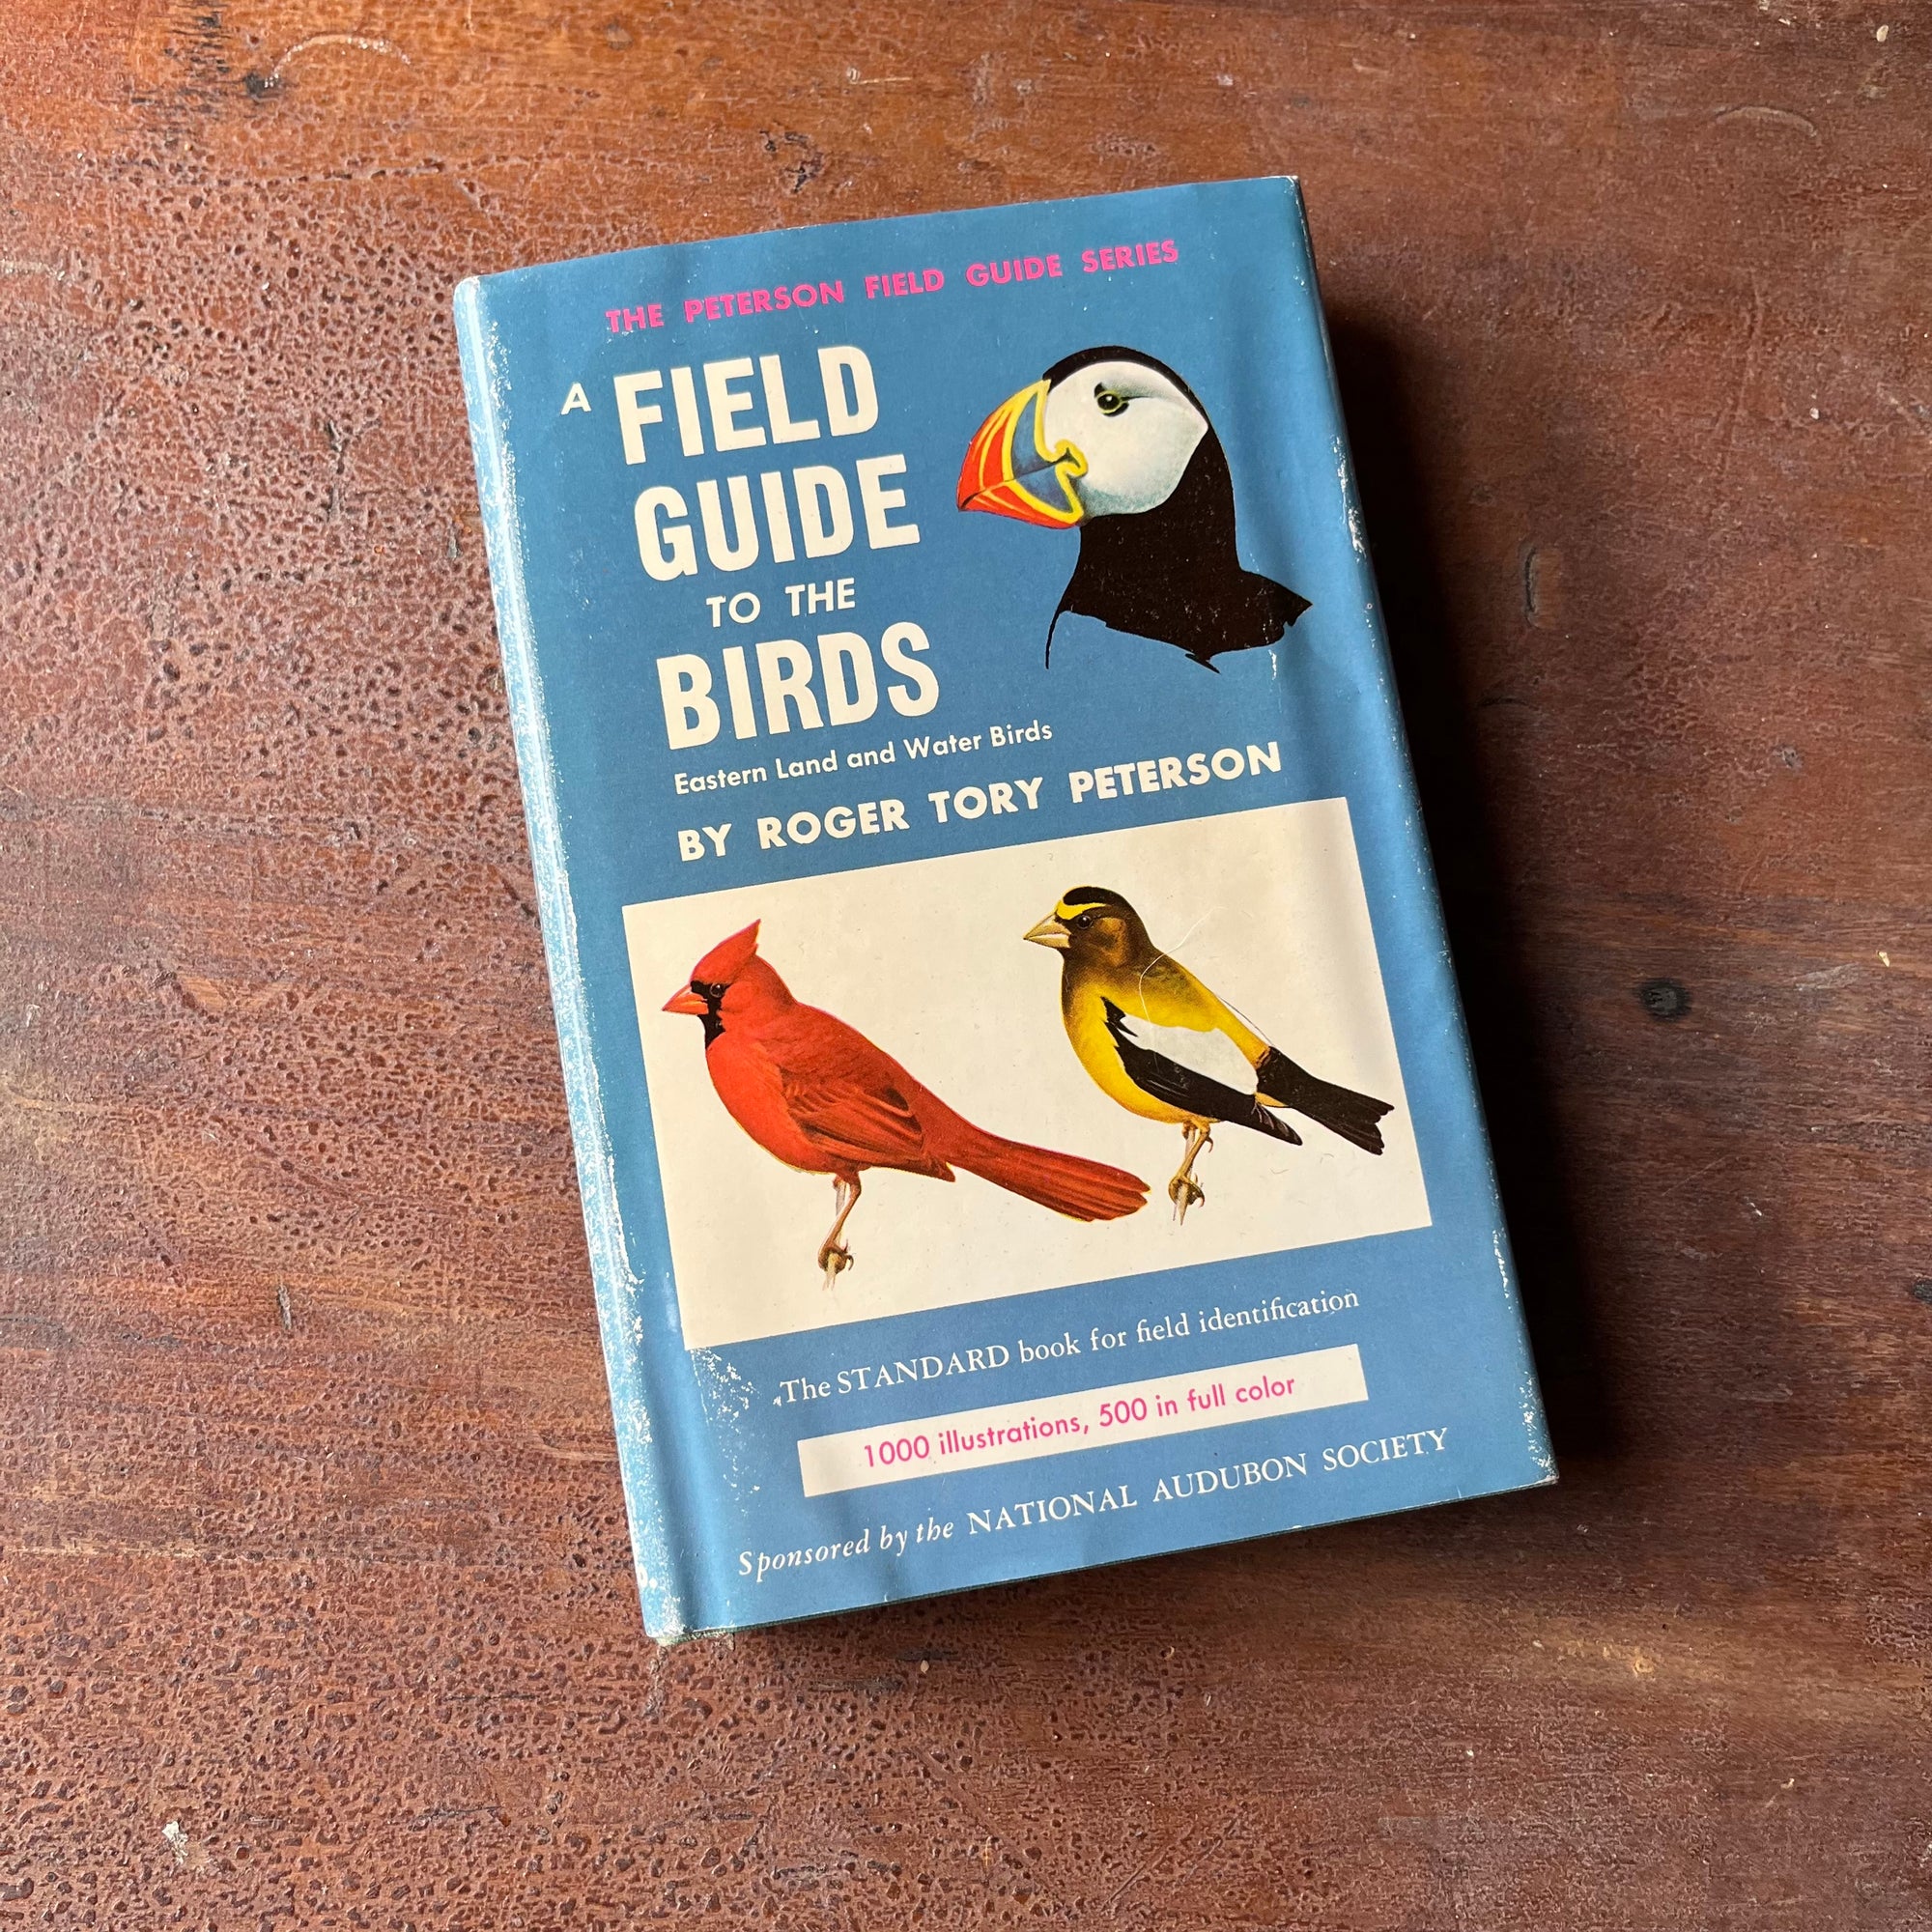 Log Cabin Vintage – vintage non-fiction – nature books – bird identification book – field guide – Peterson Field Guide - A Field Guide to the Birds Easter Land and Water Birds - Written by Roger Tory Peterson - view of the dust jacket's front cover